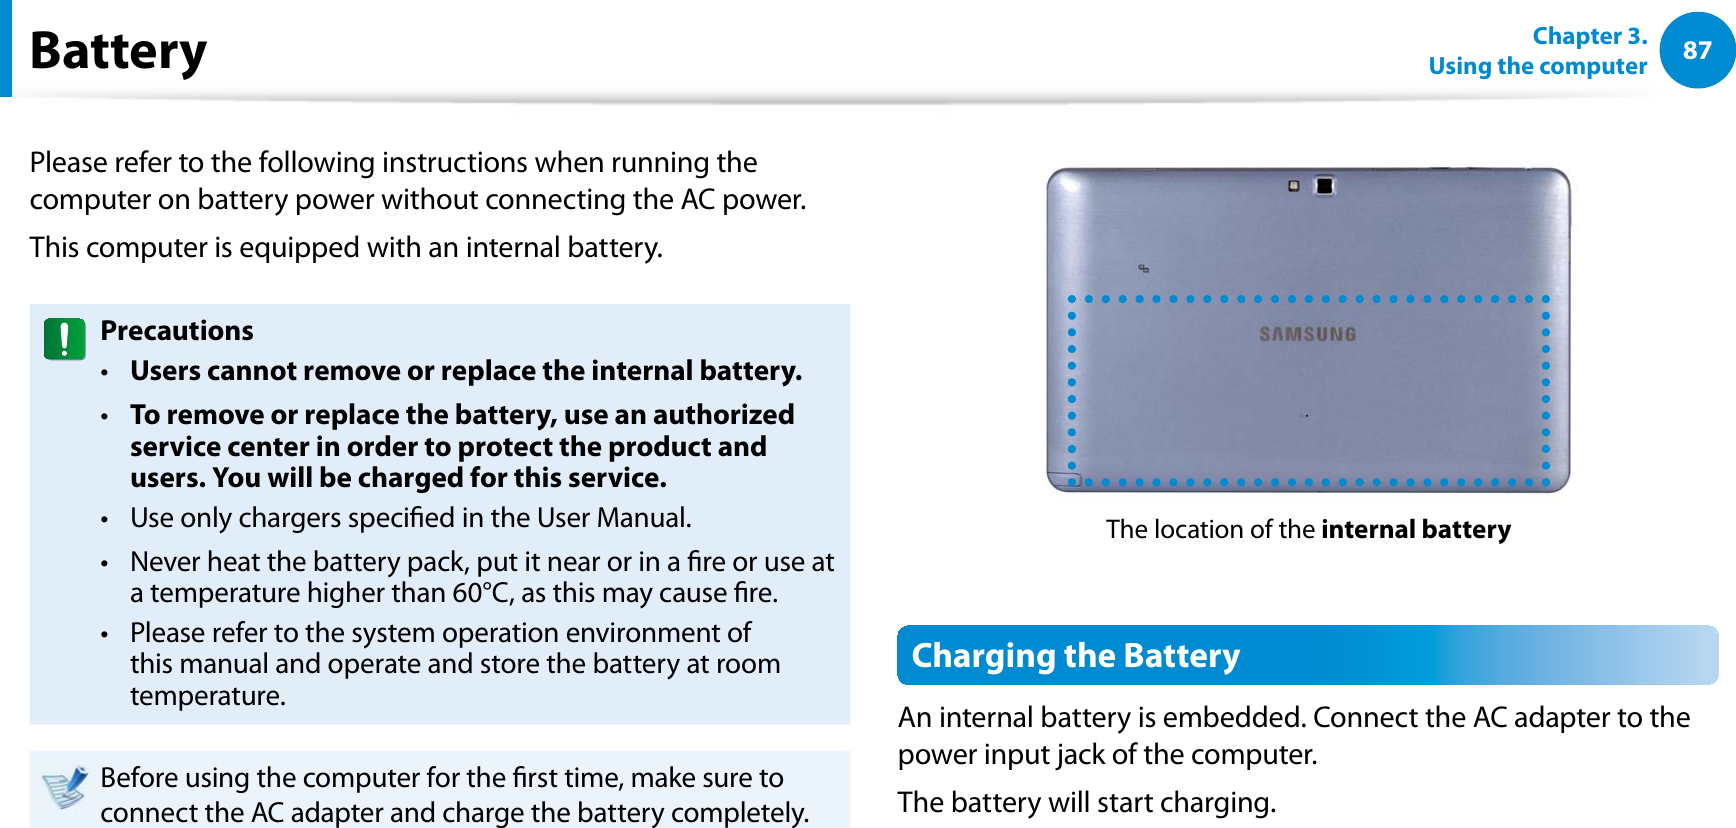 87Chapter 3.  Using the computerBatteryPlease refer to the following instructions when running the computer on battery power without connecting the AC power. This computer is equipped with an internal battery. PrecautionsUsers cannot remove or replace the internal battery. t To remove or replace the battery, use an authorized t service center in order to protect the product and users. You will be charged for this service.Use only chargers specied in the User Manual.t Never heat the battery pack, put it near or in a re or use at t a temperature higher than 60°C, as this may cause re.Please refer to the system operation environment of t this manual and operate and store the battery at room temperature.Before using the computer for the rst time, make sure to connect the AC adapter and charge the battery completely.The location of the internal batteryCharging the BatteryAn internal battery is embedded. Connect the AC adapter to the power input jack of the computer.The battery will start charging.